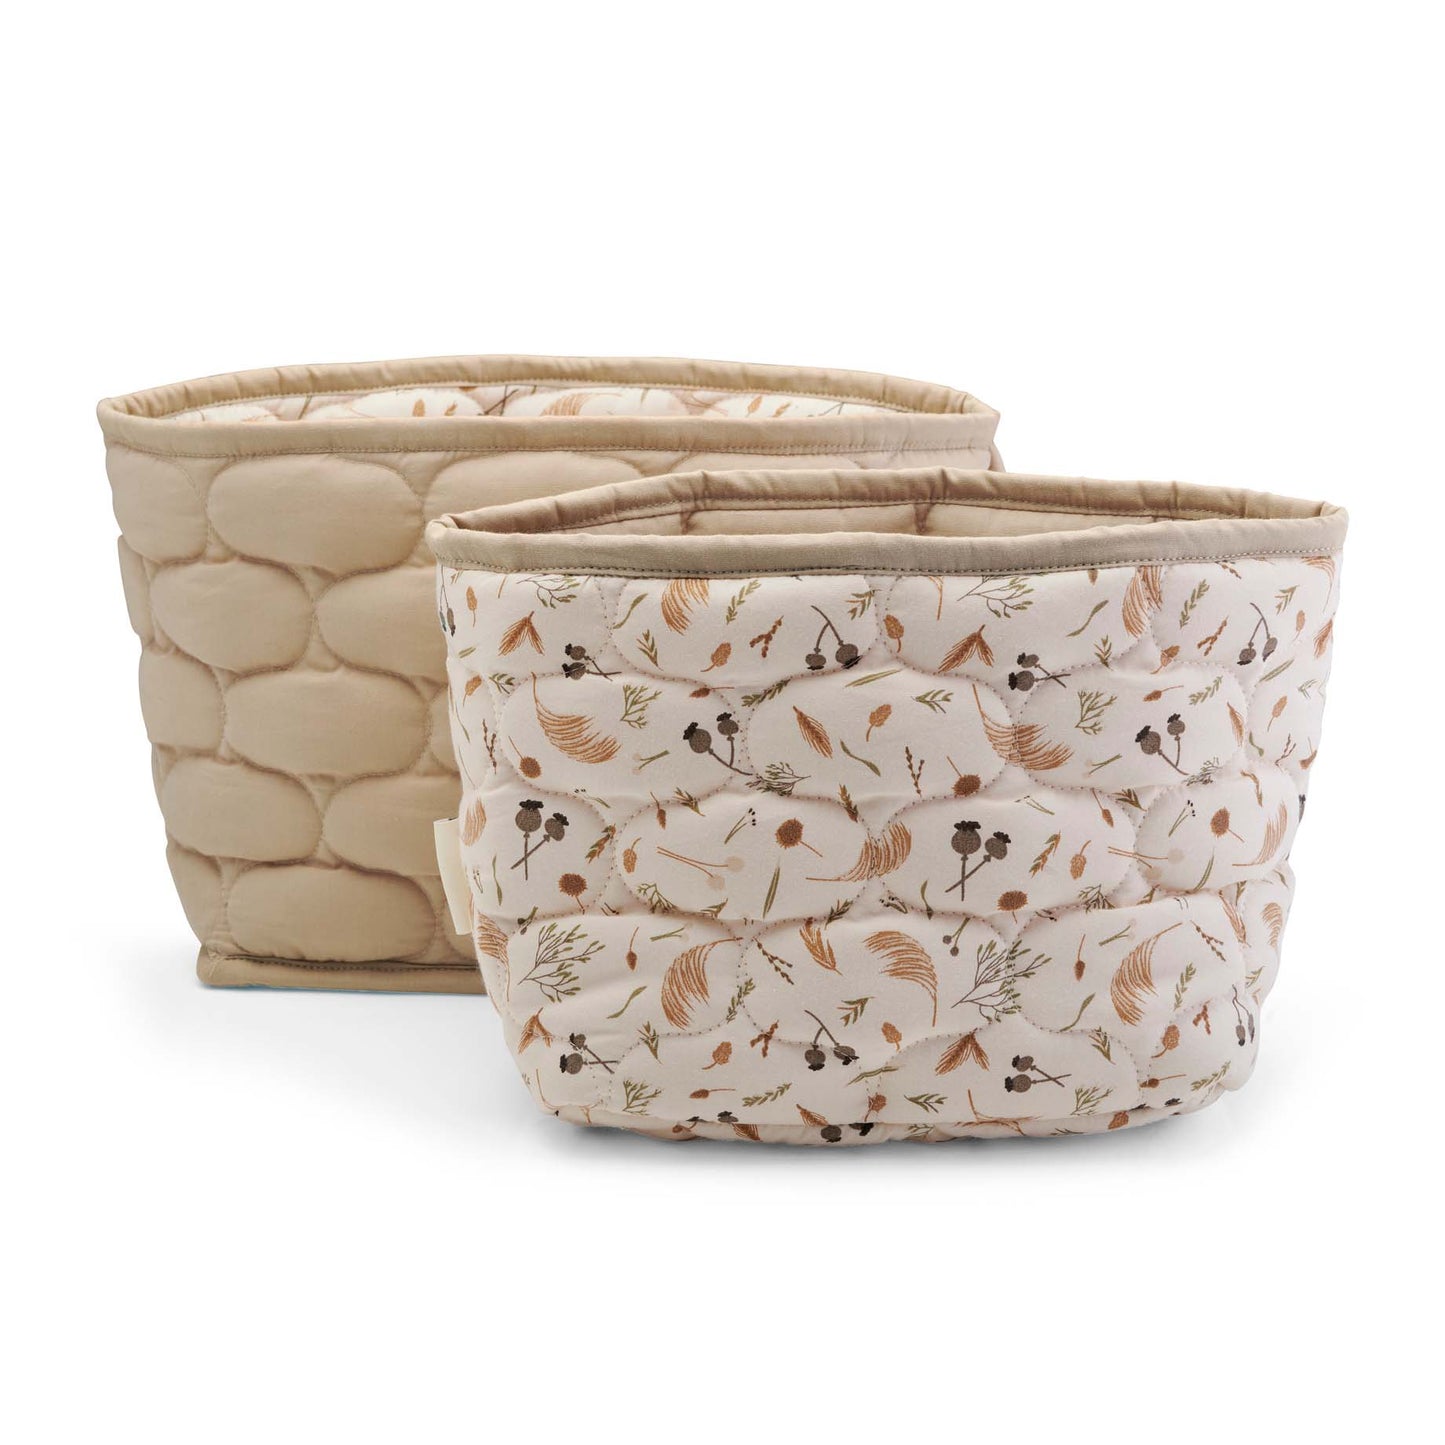 Avery Row Small Quilted Storage Baskets Set of 2 - Grasslands